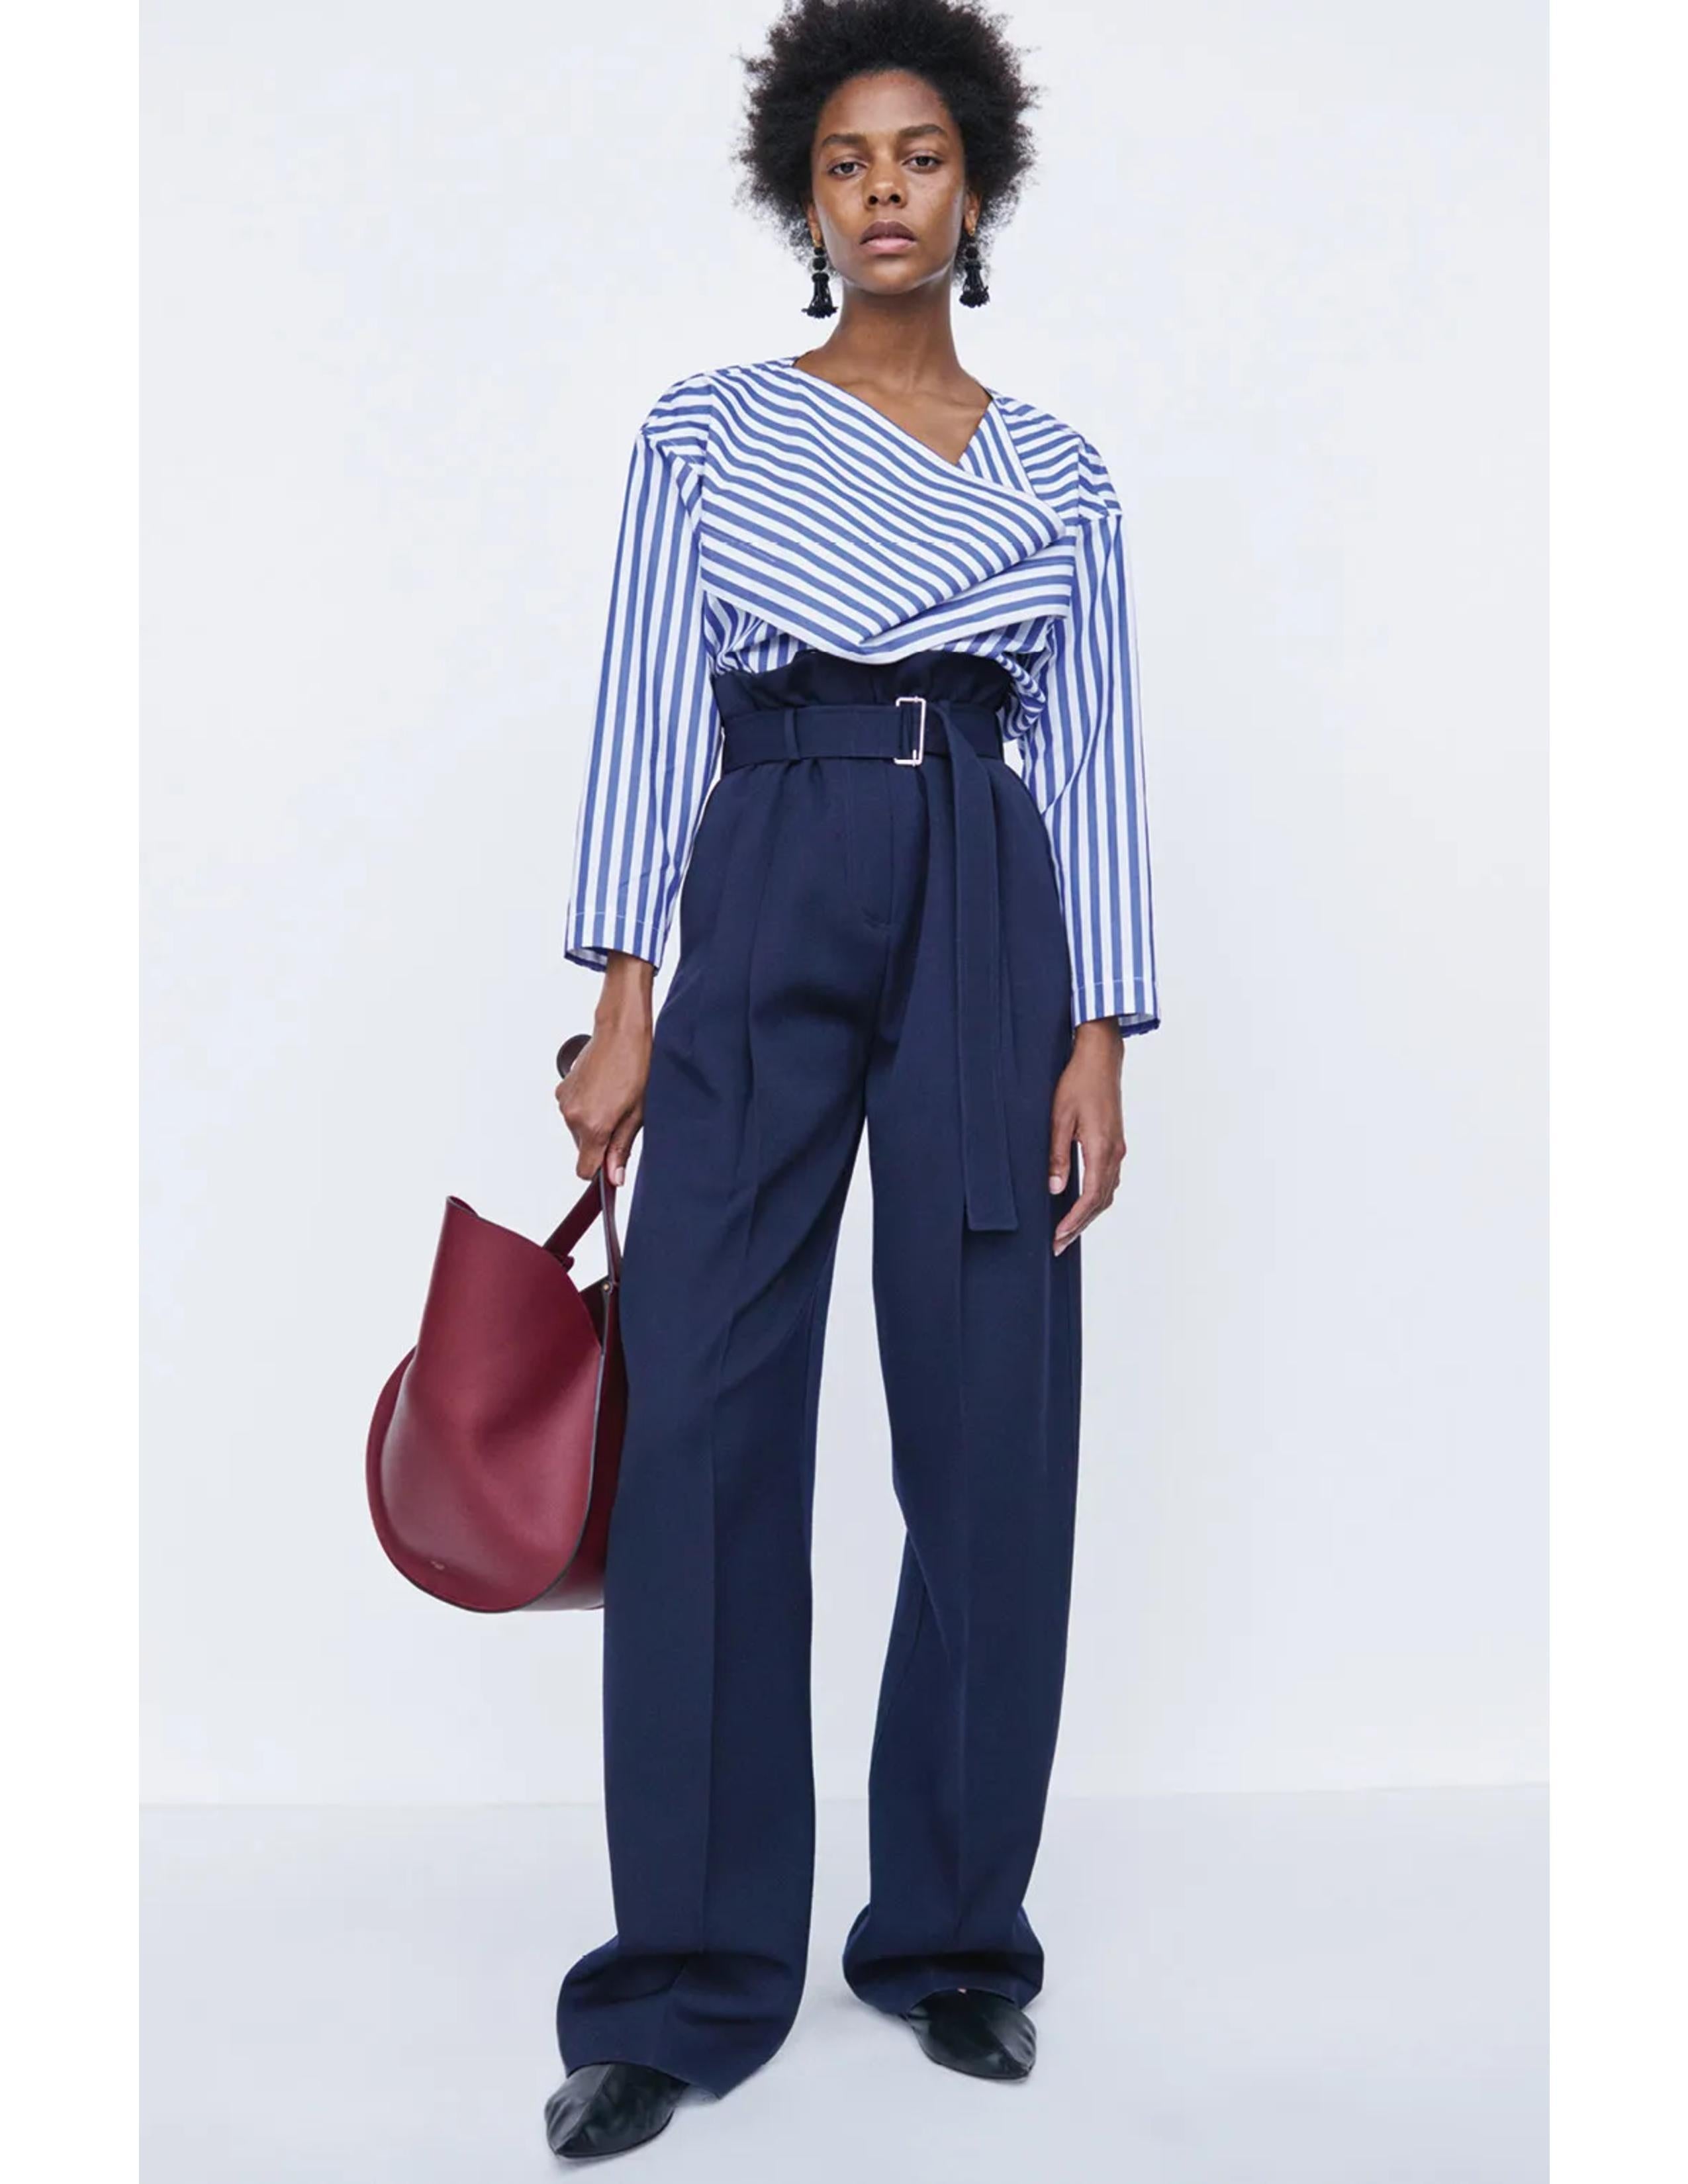 Women's or Men's CELINE by PHOEBE PHILO blue striped shirt with draped collar - Resort 2016